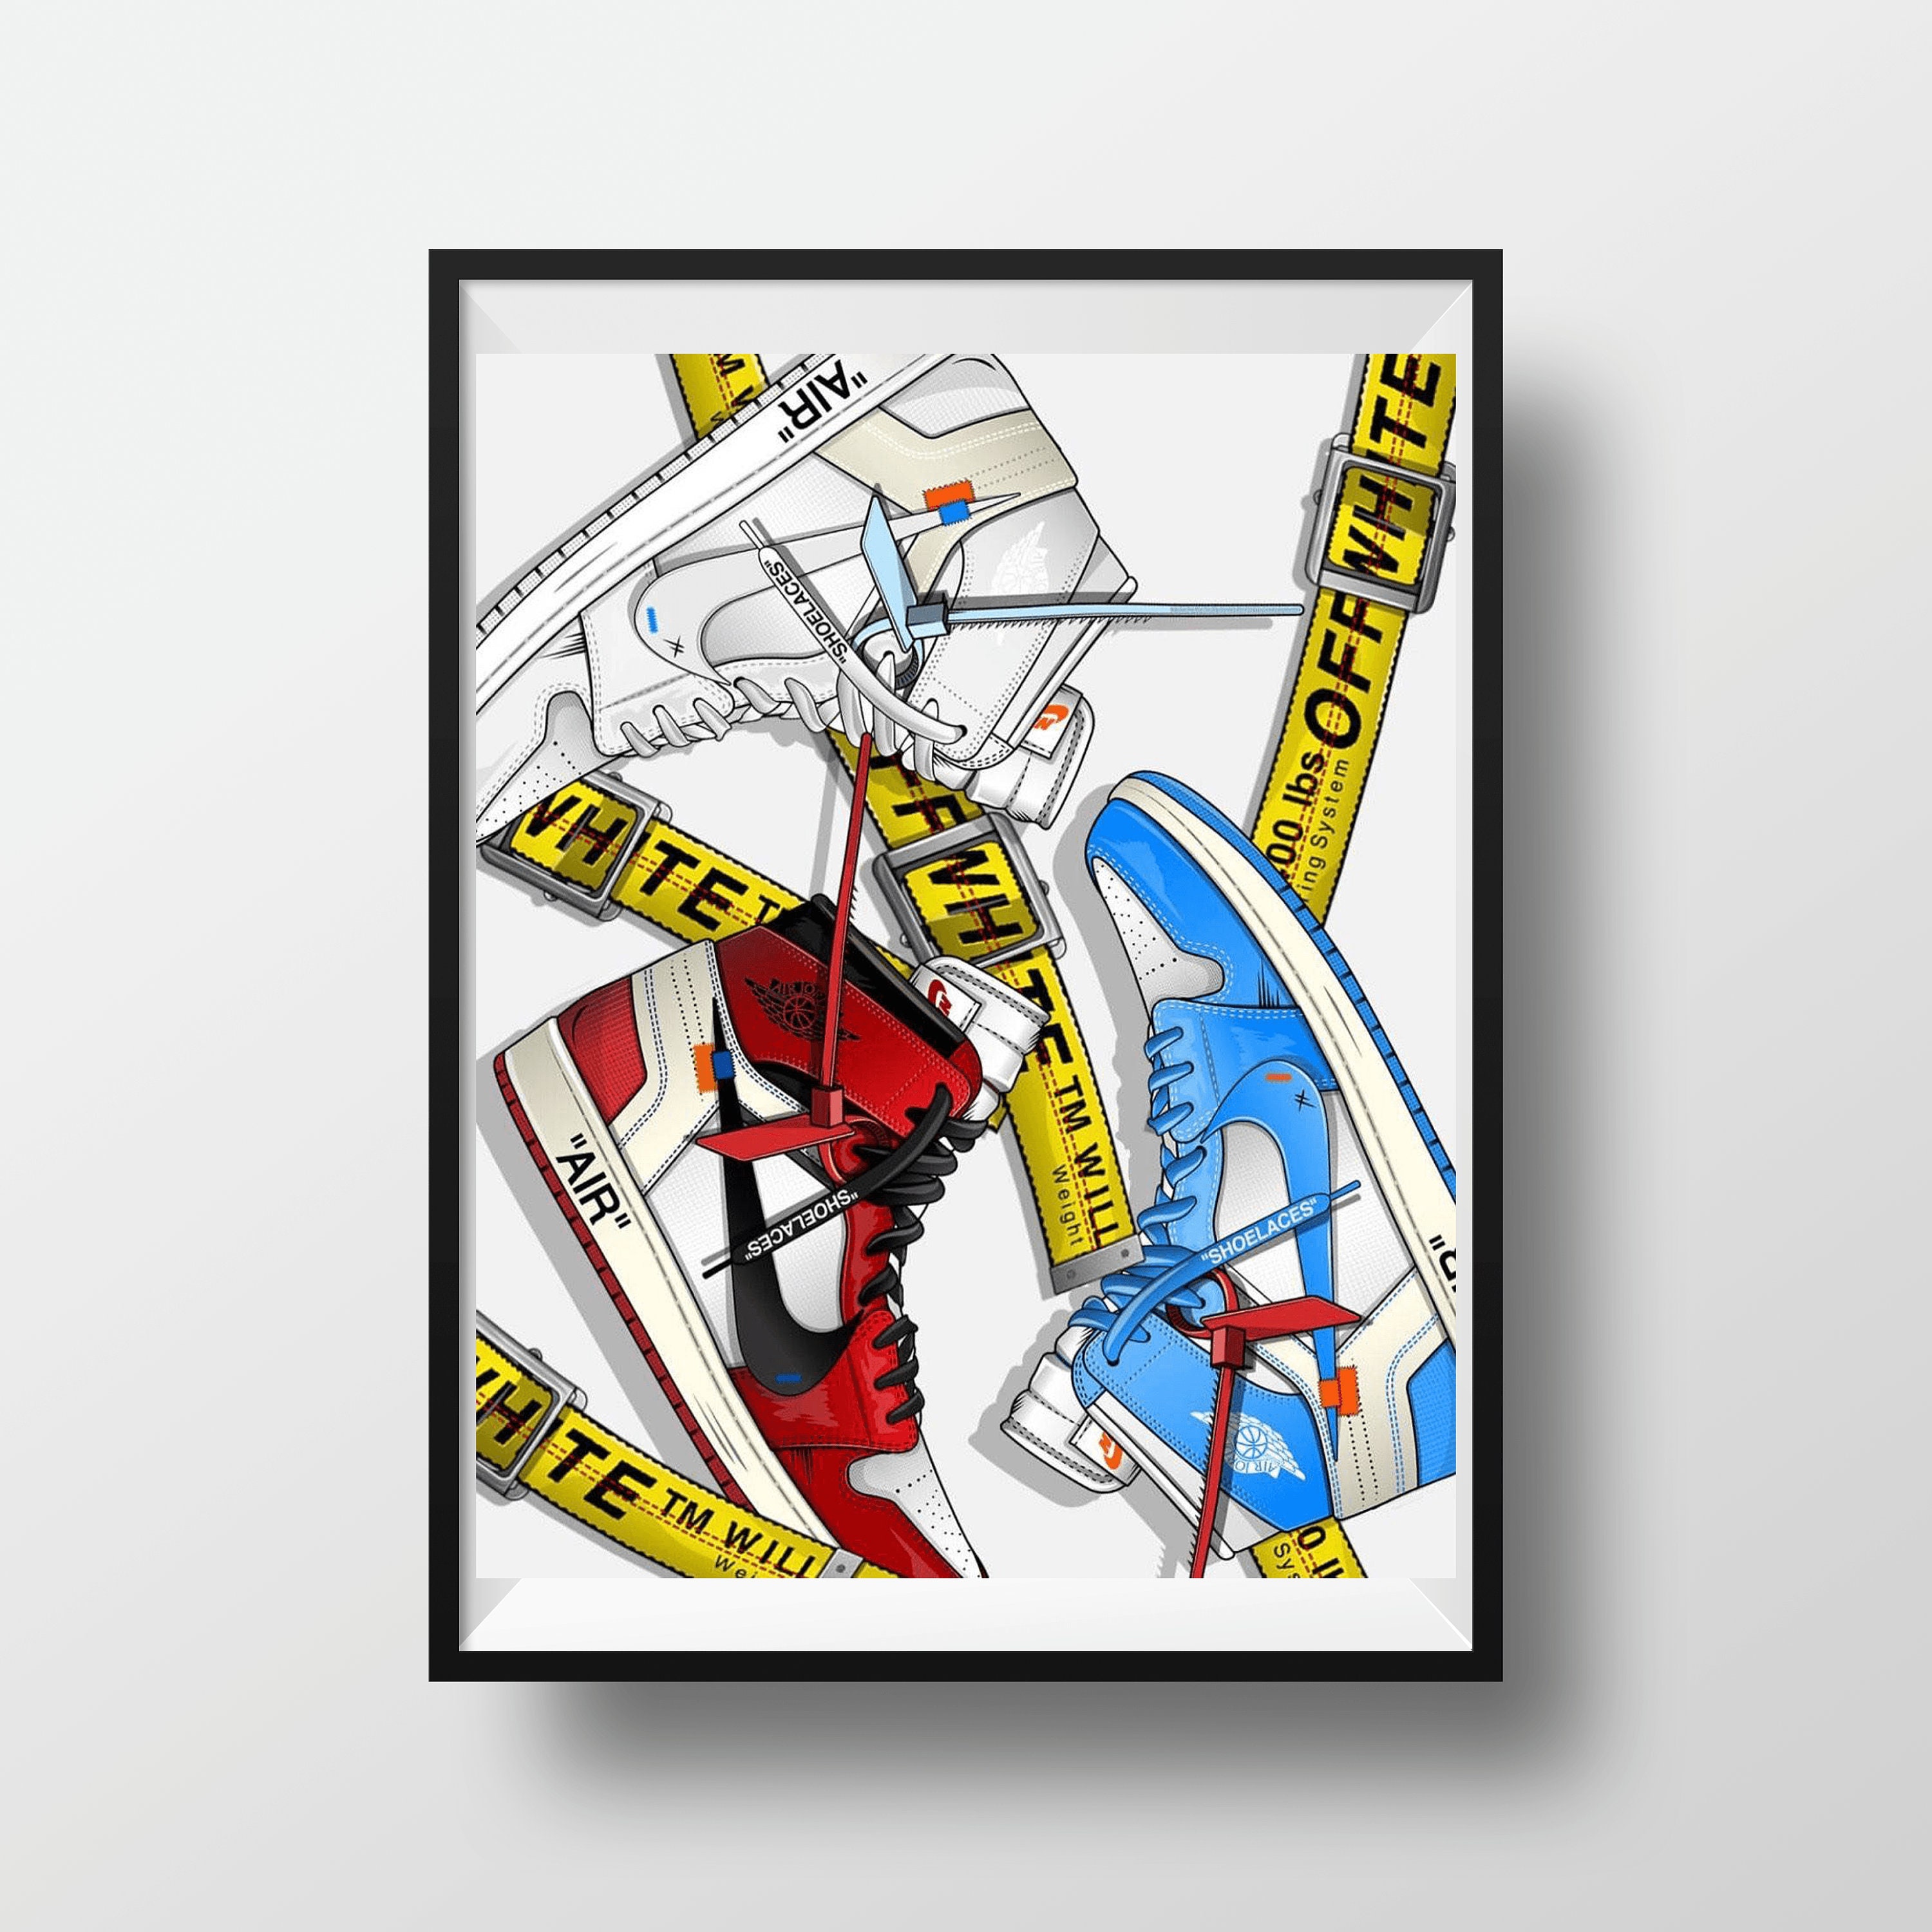 Off-White c/o NIKE, INC. THE TEN Campaign - WNW  Nike campaign, Sneaker  posters, Sneakers illustration